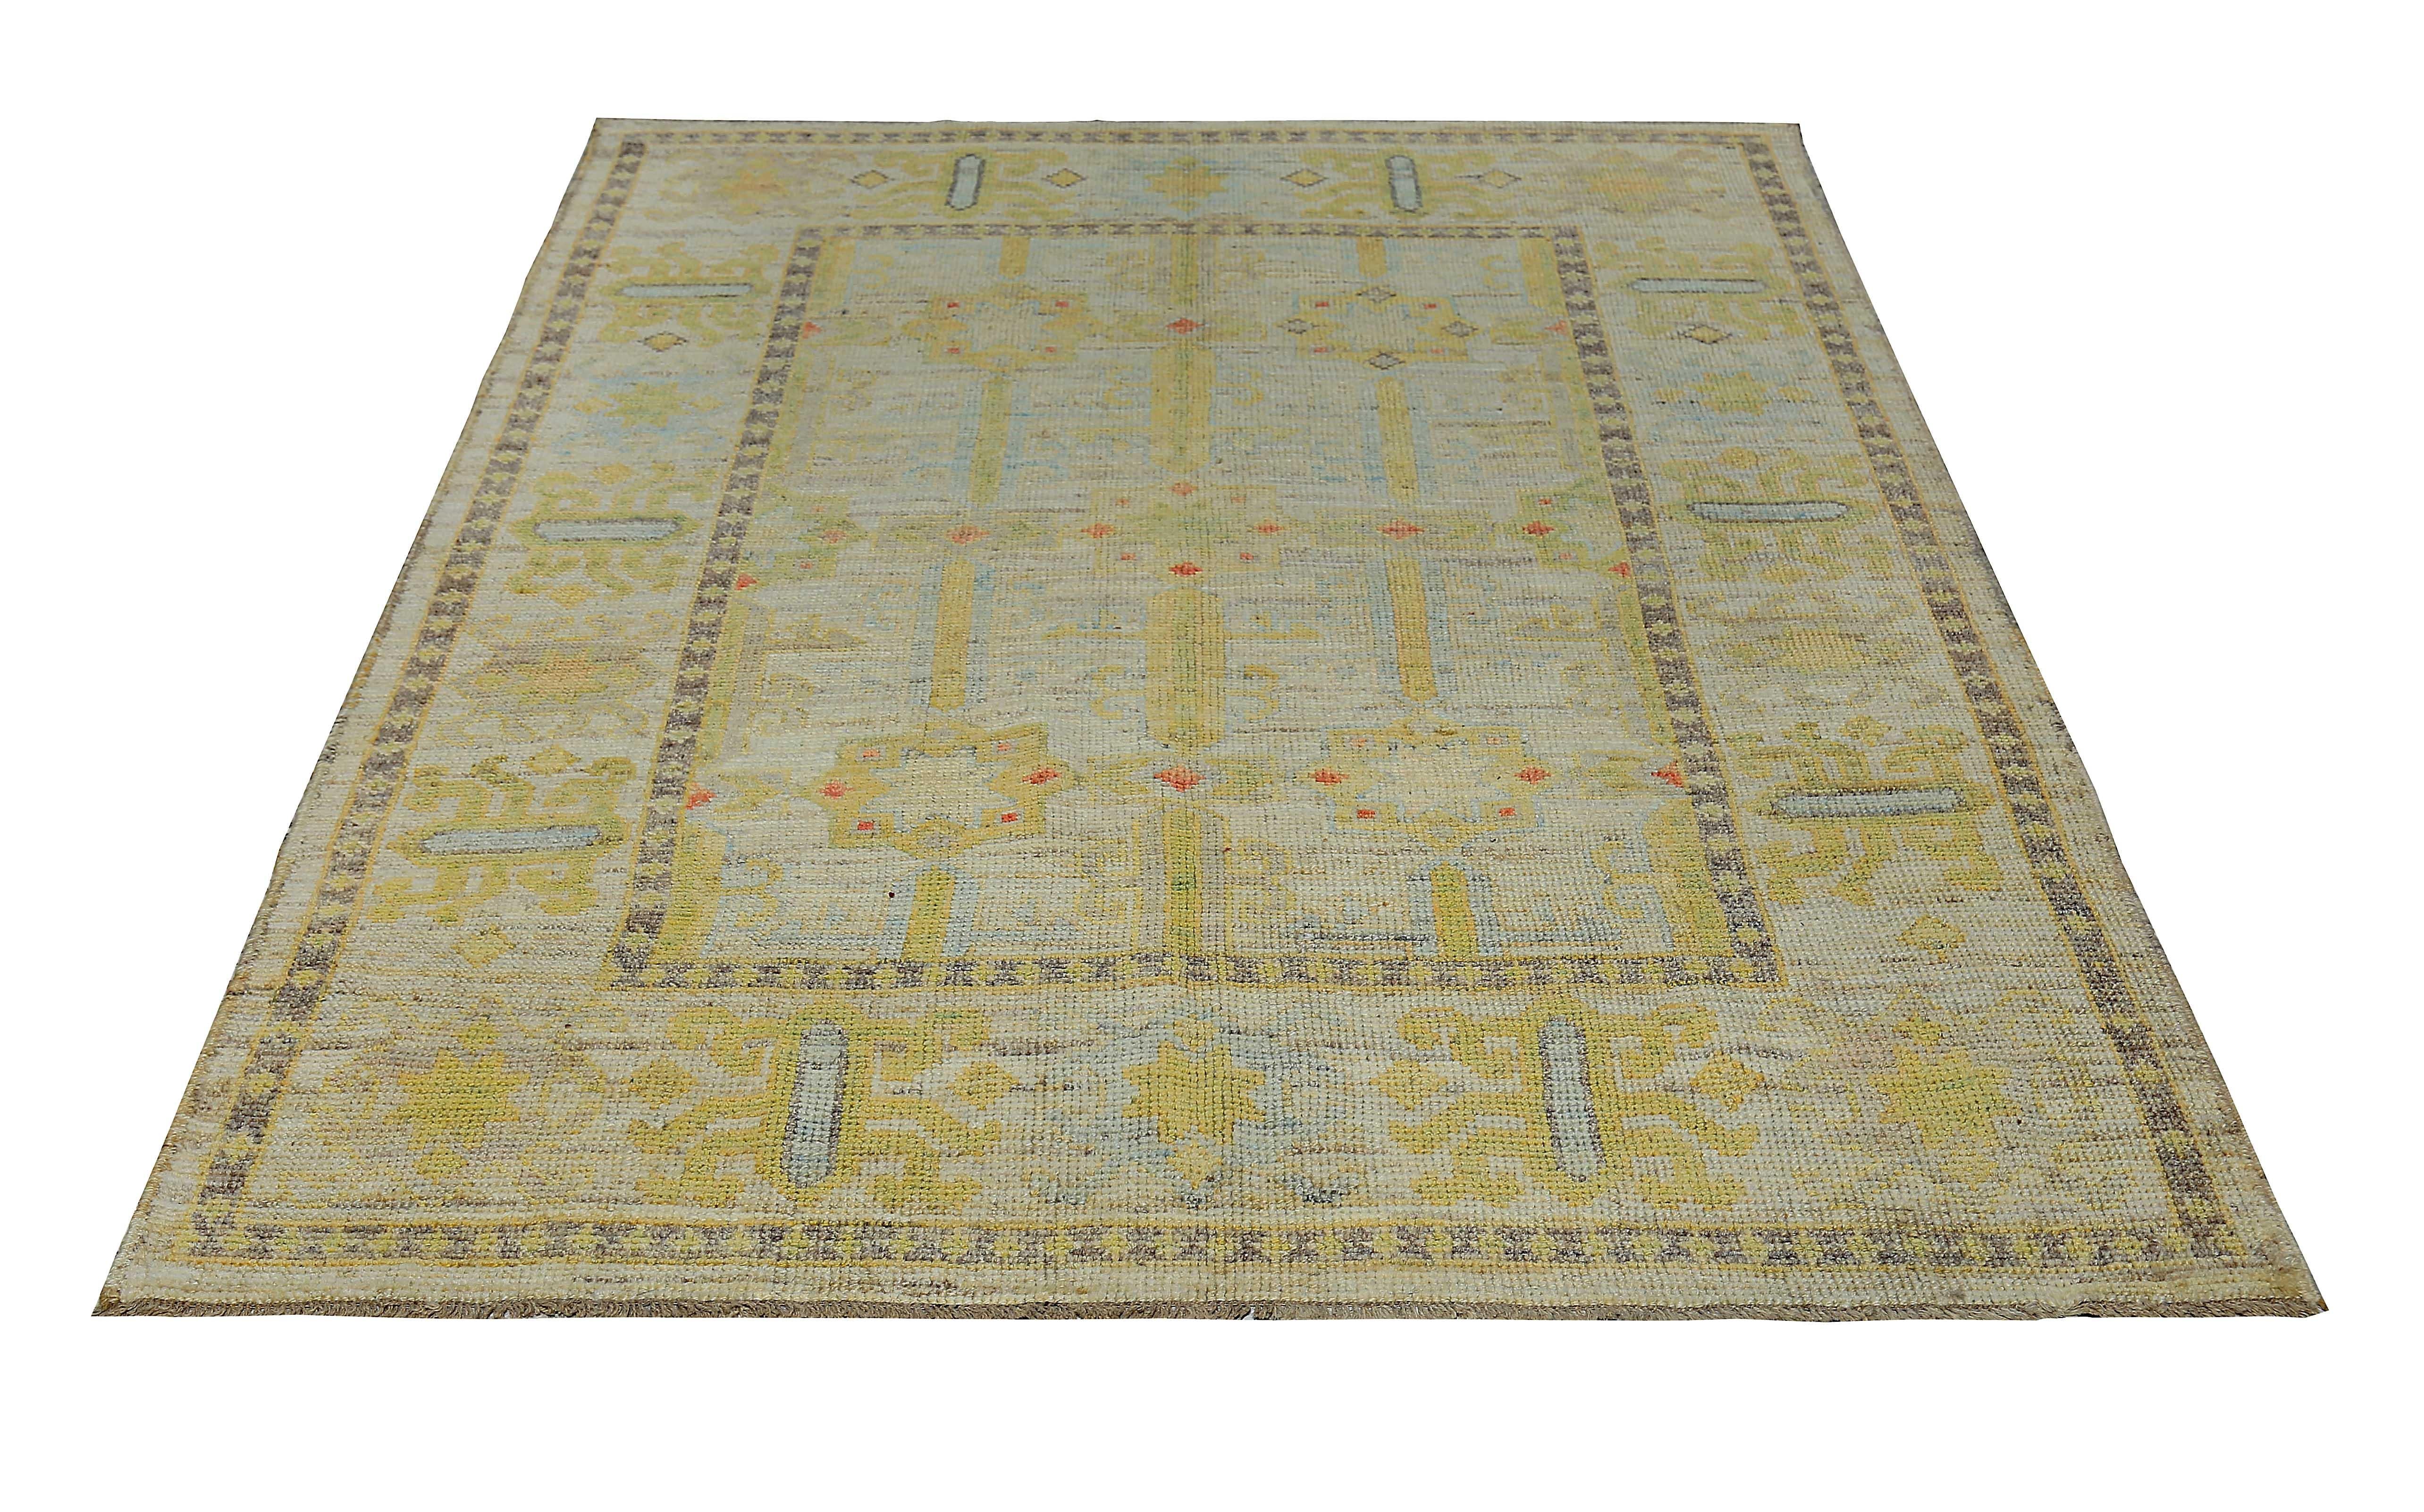 New Turkish rug made of handwoven sheep’s wool of the finest quality. It’s colored with organic vegetable dyes that are certified safe for humans and pets alike. It features gold and gray floral medallions on a Fine ivory field. Flower patterns are